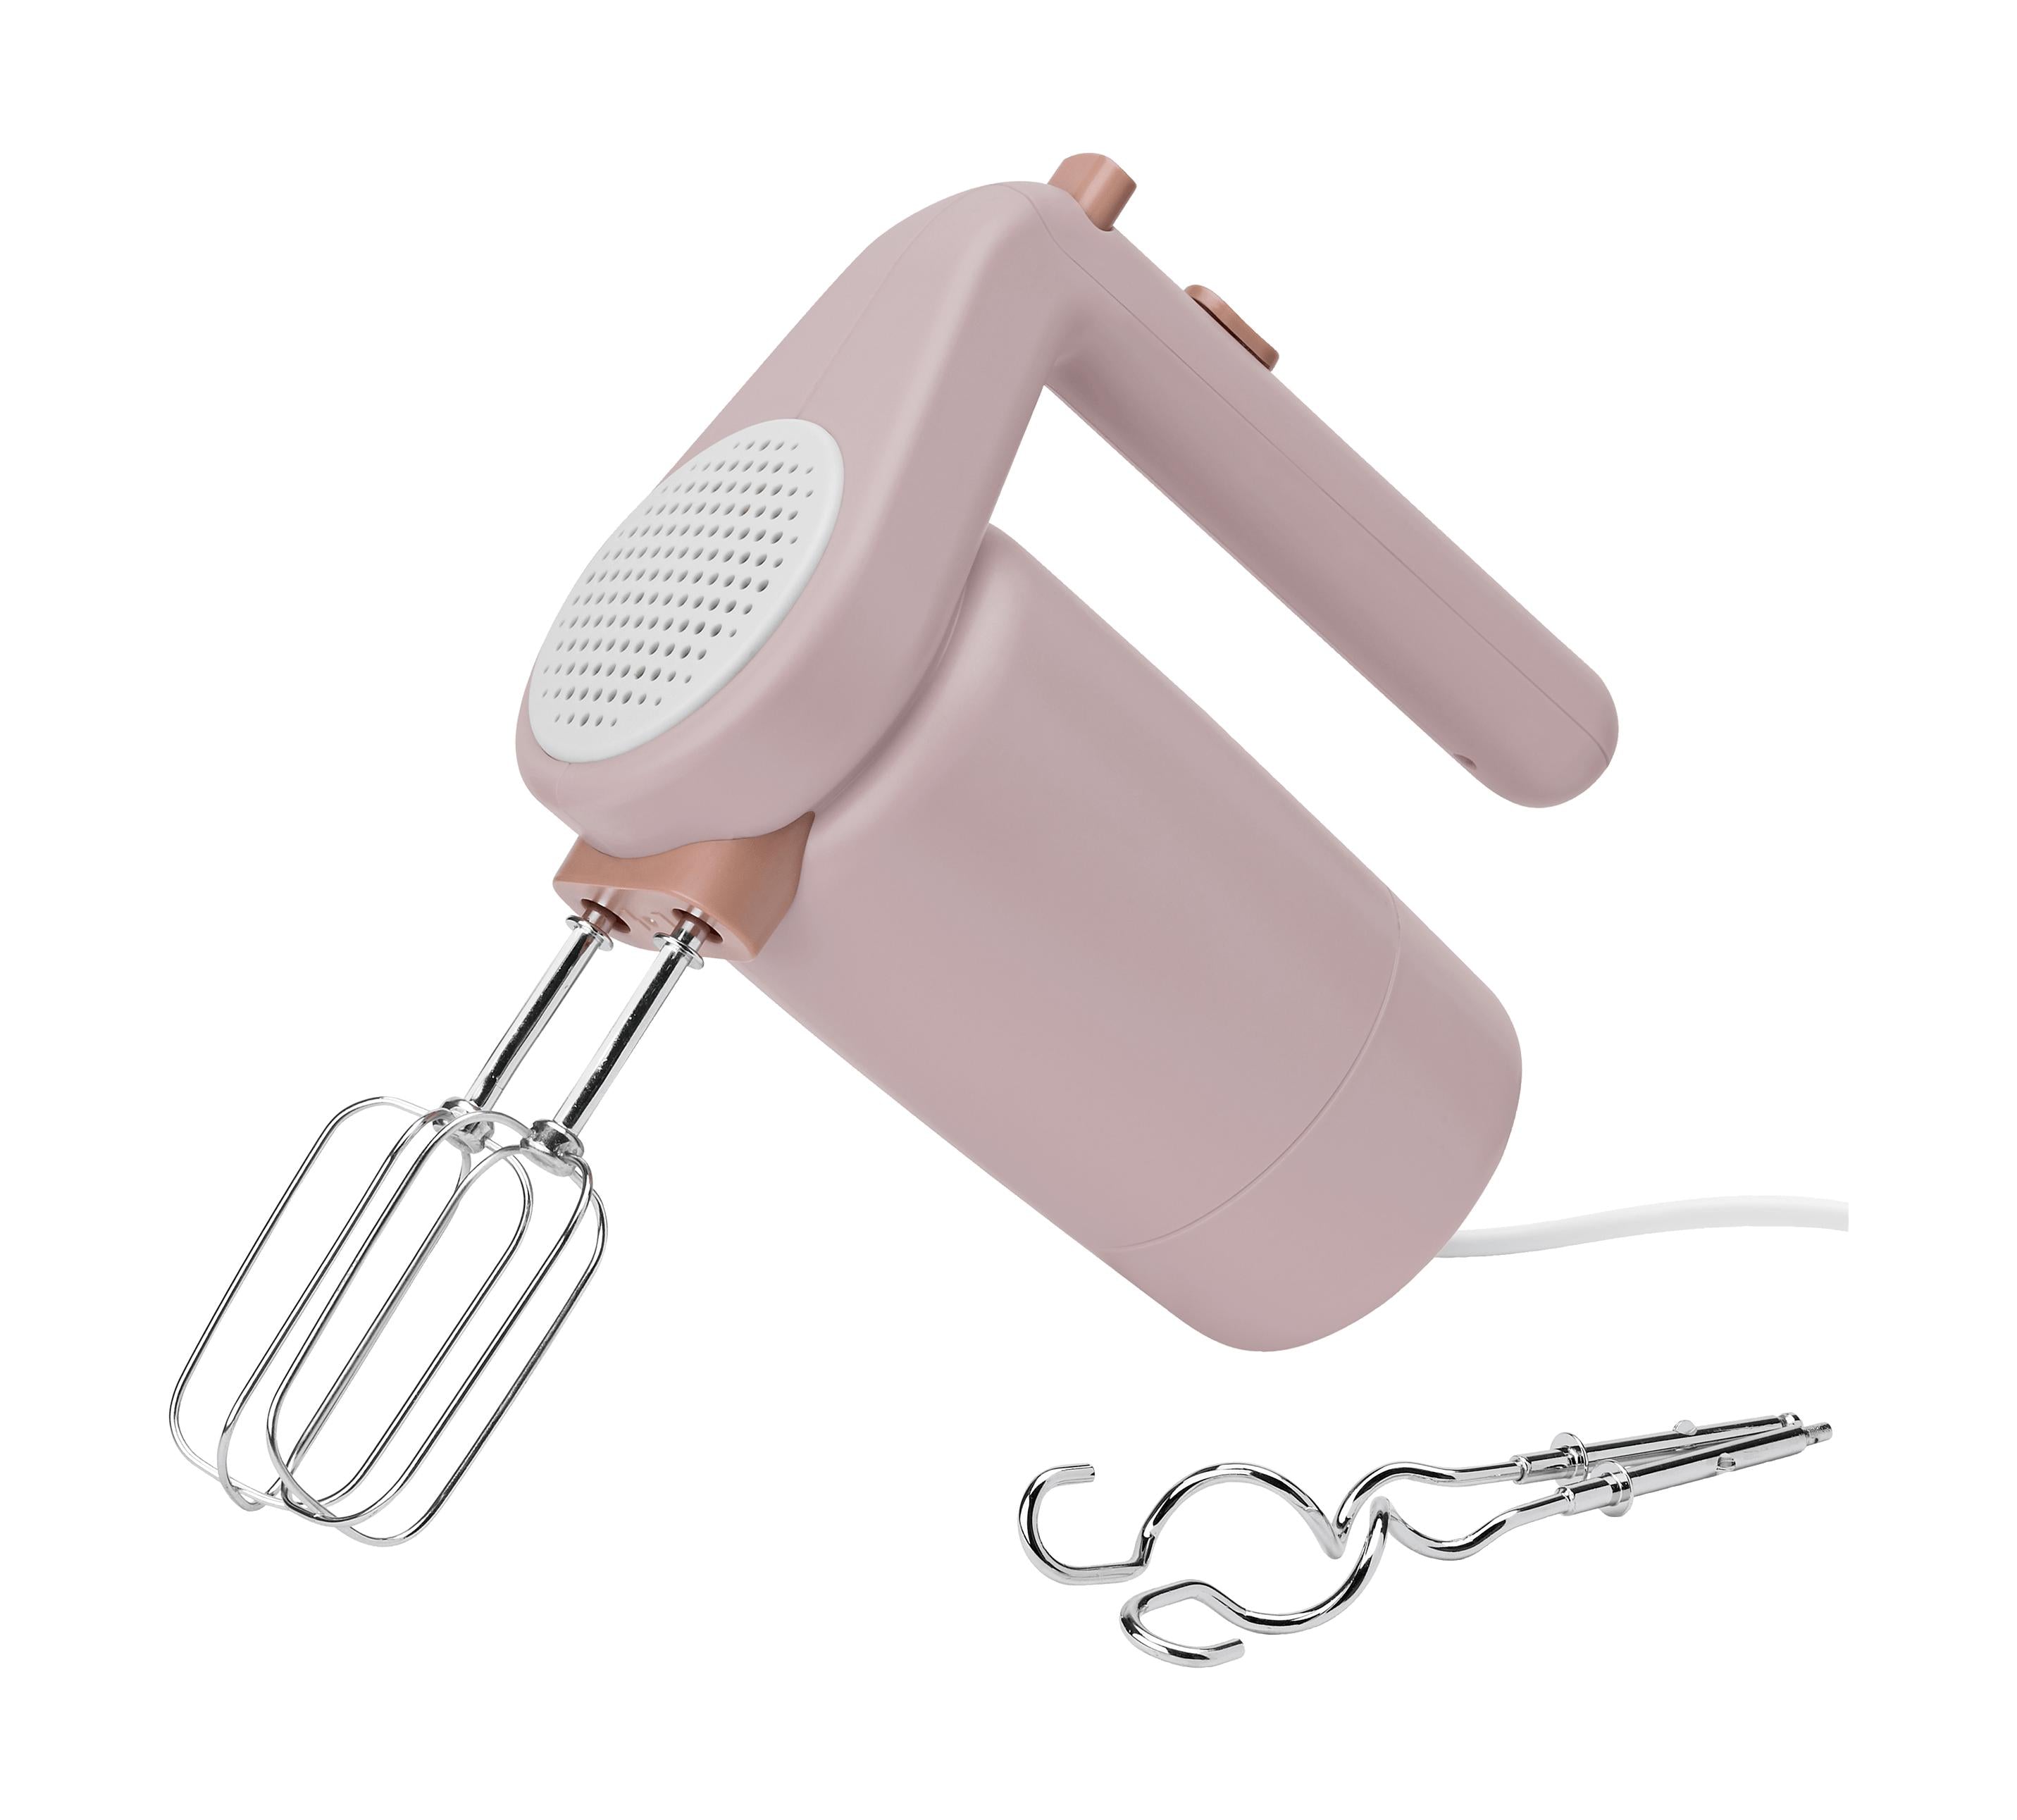 Rig-Tig Foodie Hand Mixer, Light Rose